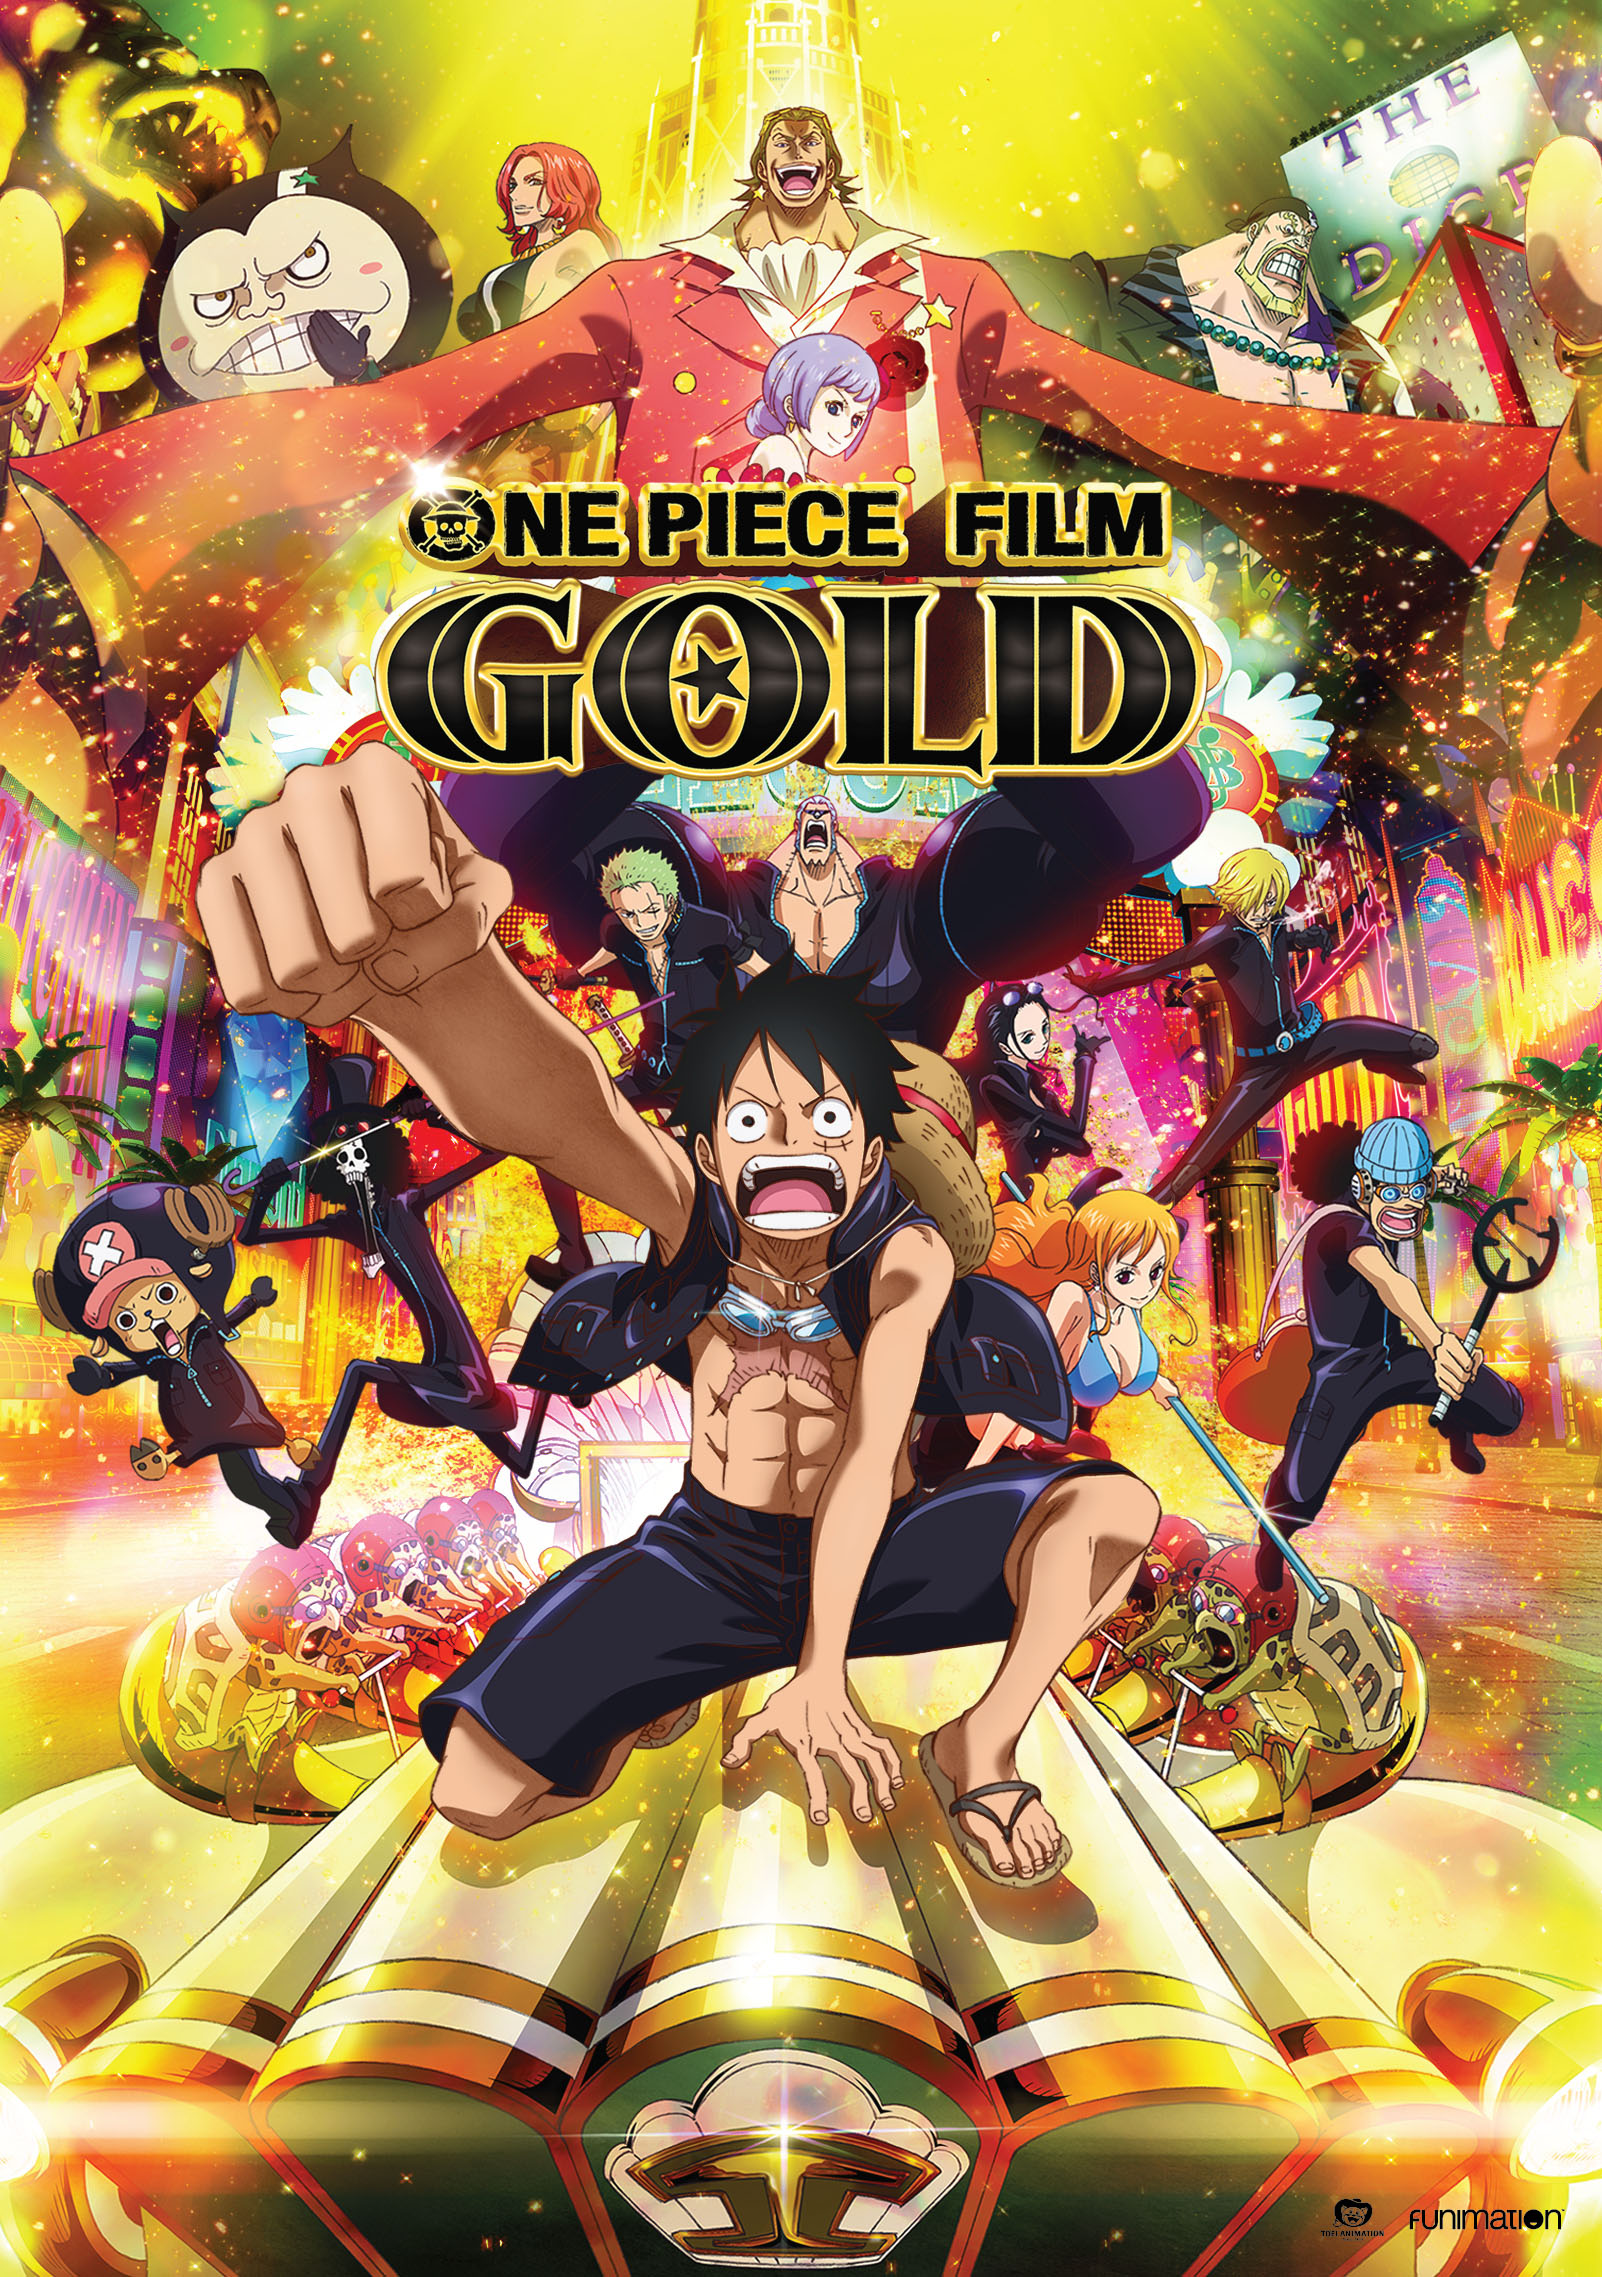 ISI Geeks - Tsutomu Kuroiwa (One Piece Film Gold, One Piece: Heart of Gold)  is writing the screenplay, and One Piece manga creator Eiichiro Oda himself  is serving as executive producer. you